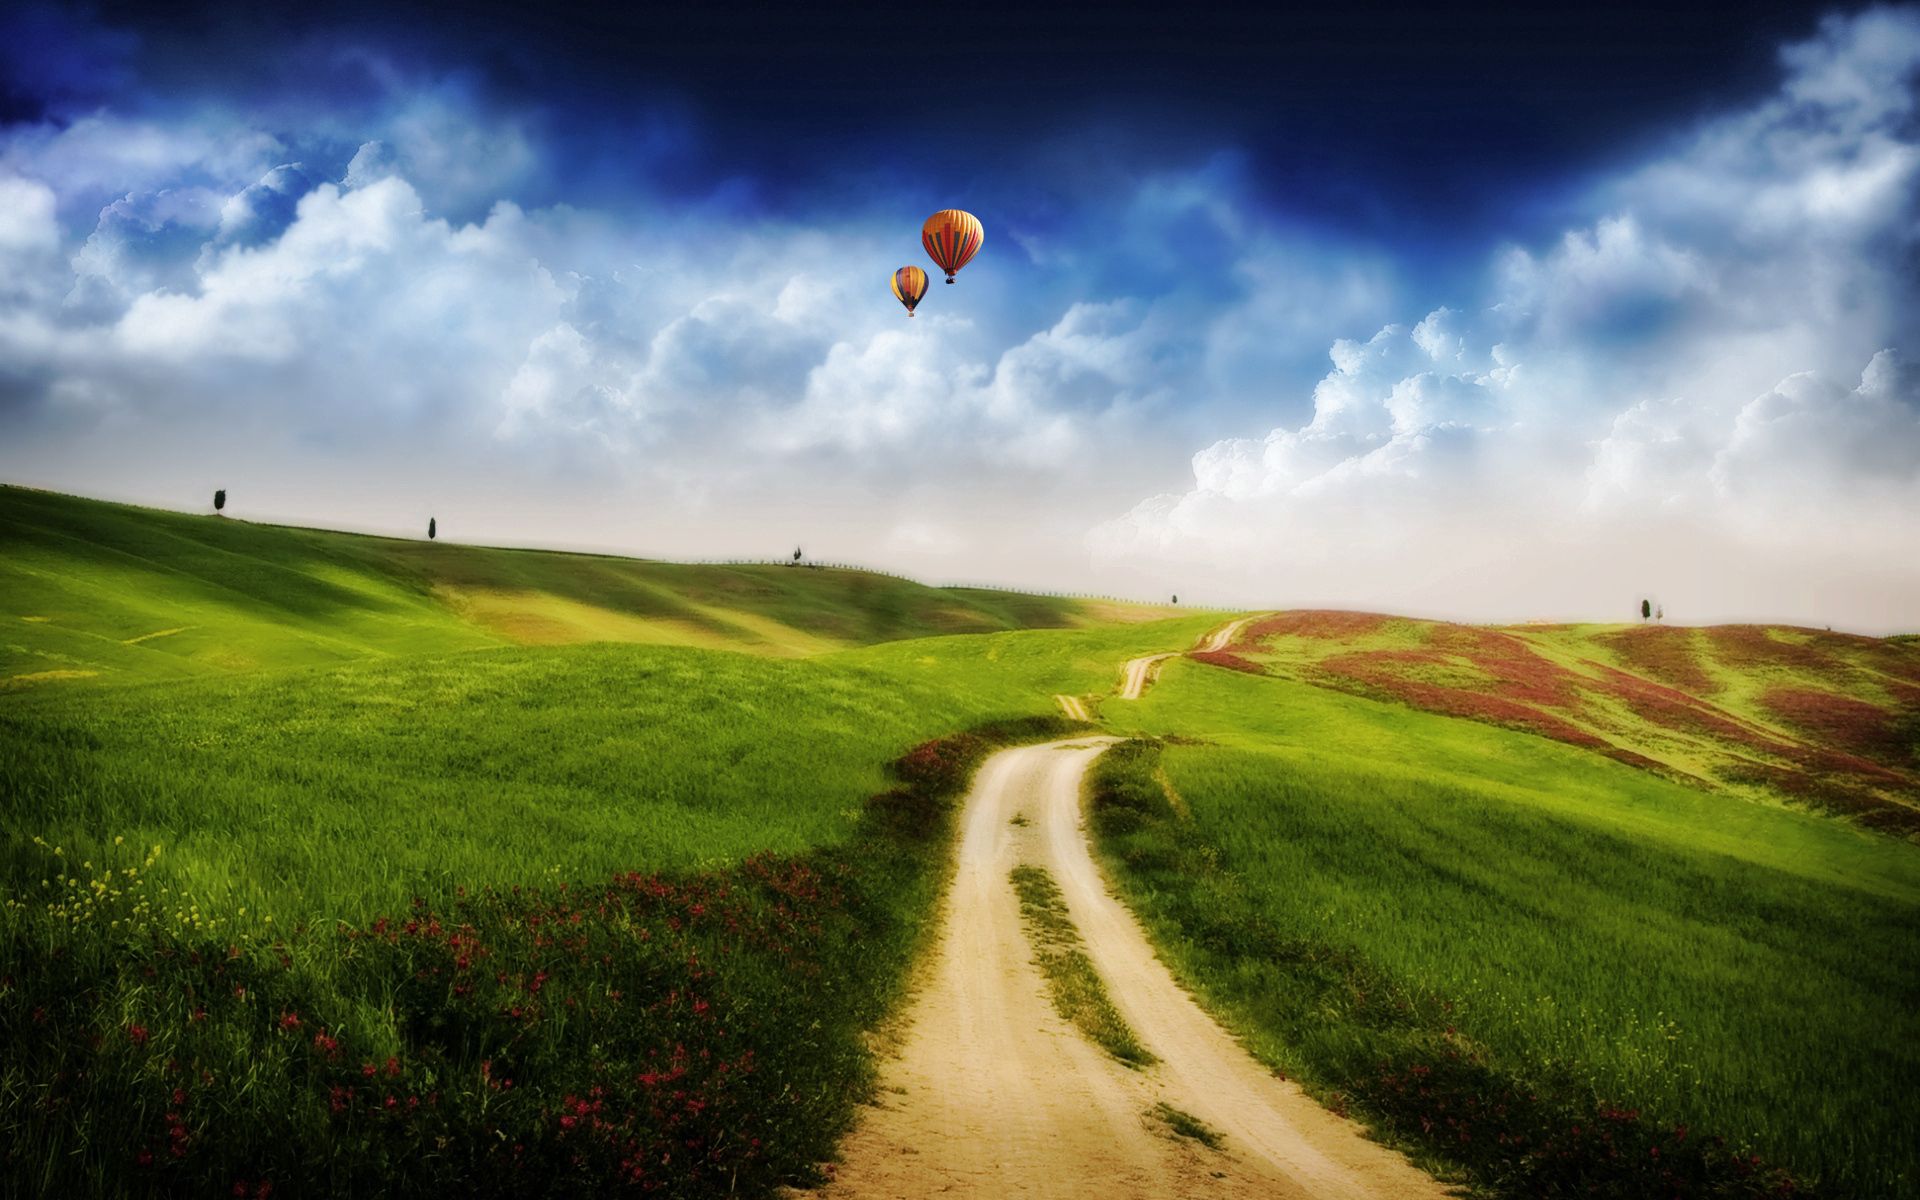 High Definition wallpaper balloons, nature, road, country